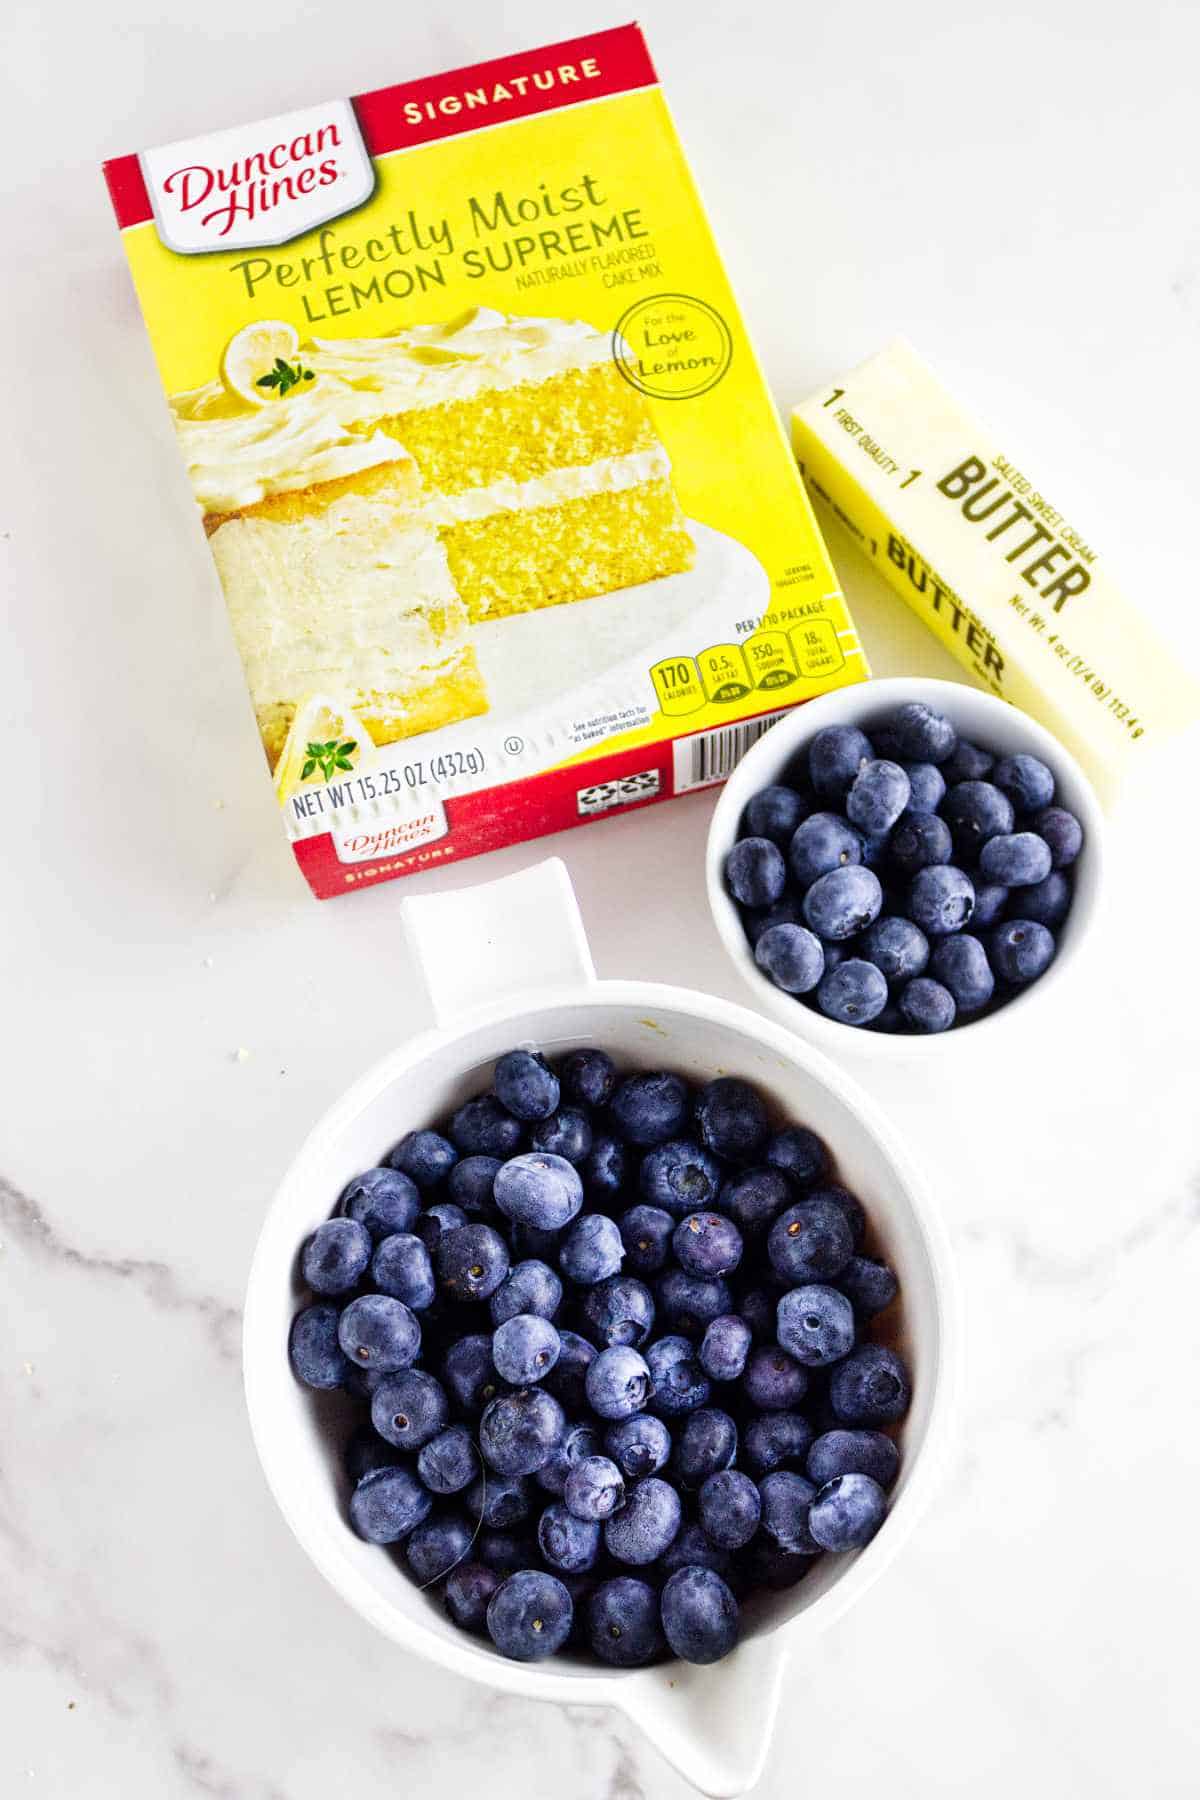 lemon cake mix, stick of butter, and fresh blueberries.